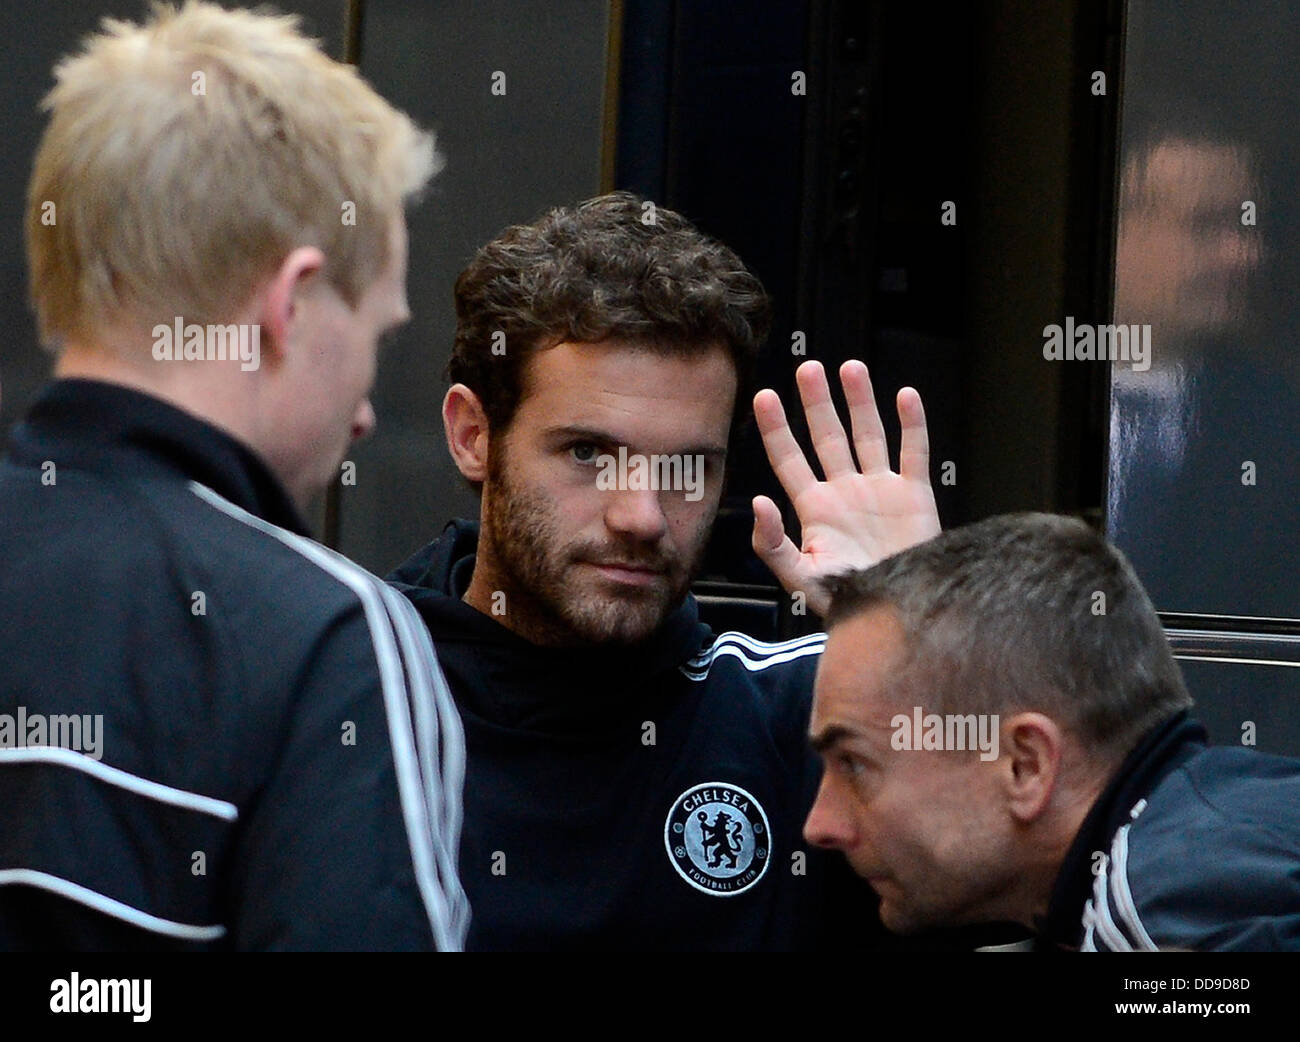 Prague, Czech Republic. 29th Aug, 2013. Juan Manuel Mata from Chelsea greets bystanders at a hotel in Prague, Thursday, Aug. 29, 2013. FC Chelsea faces FC Bayern Munich in Super Cup soccer match on Friday Aug. 30. Credit:  Roman Vondrous/CTK Photo/Alamy Live News Stock Photo